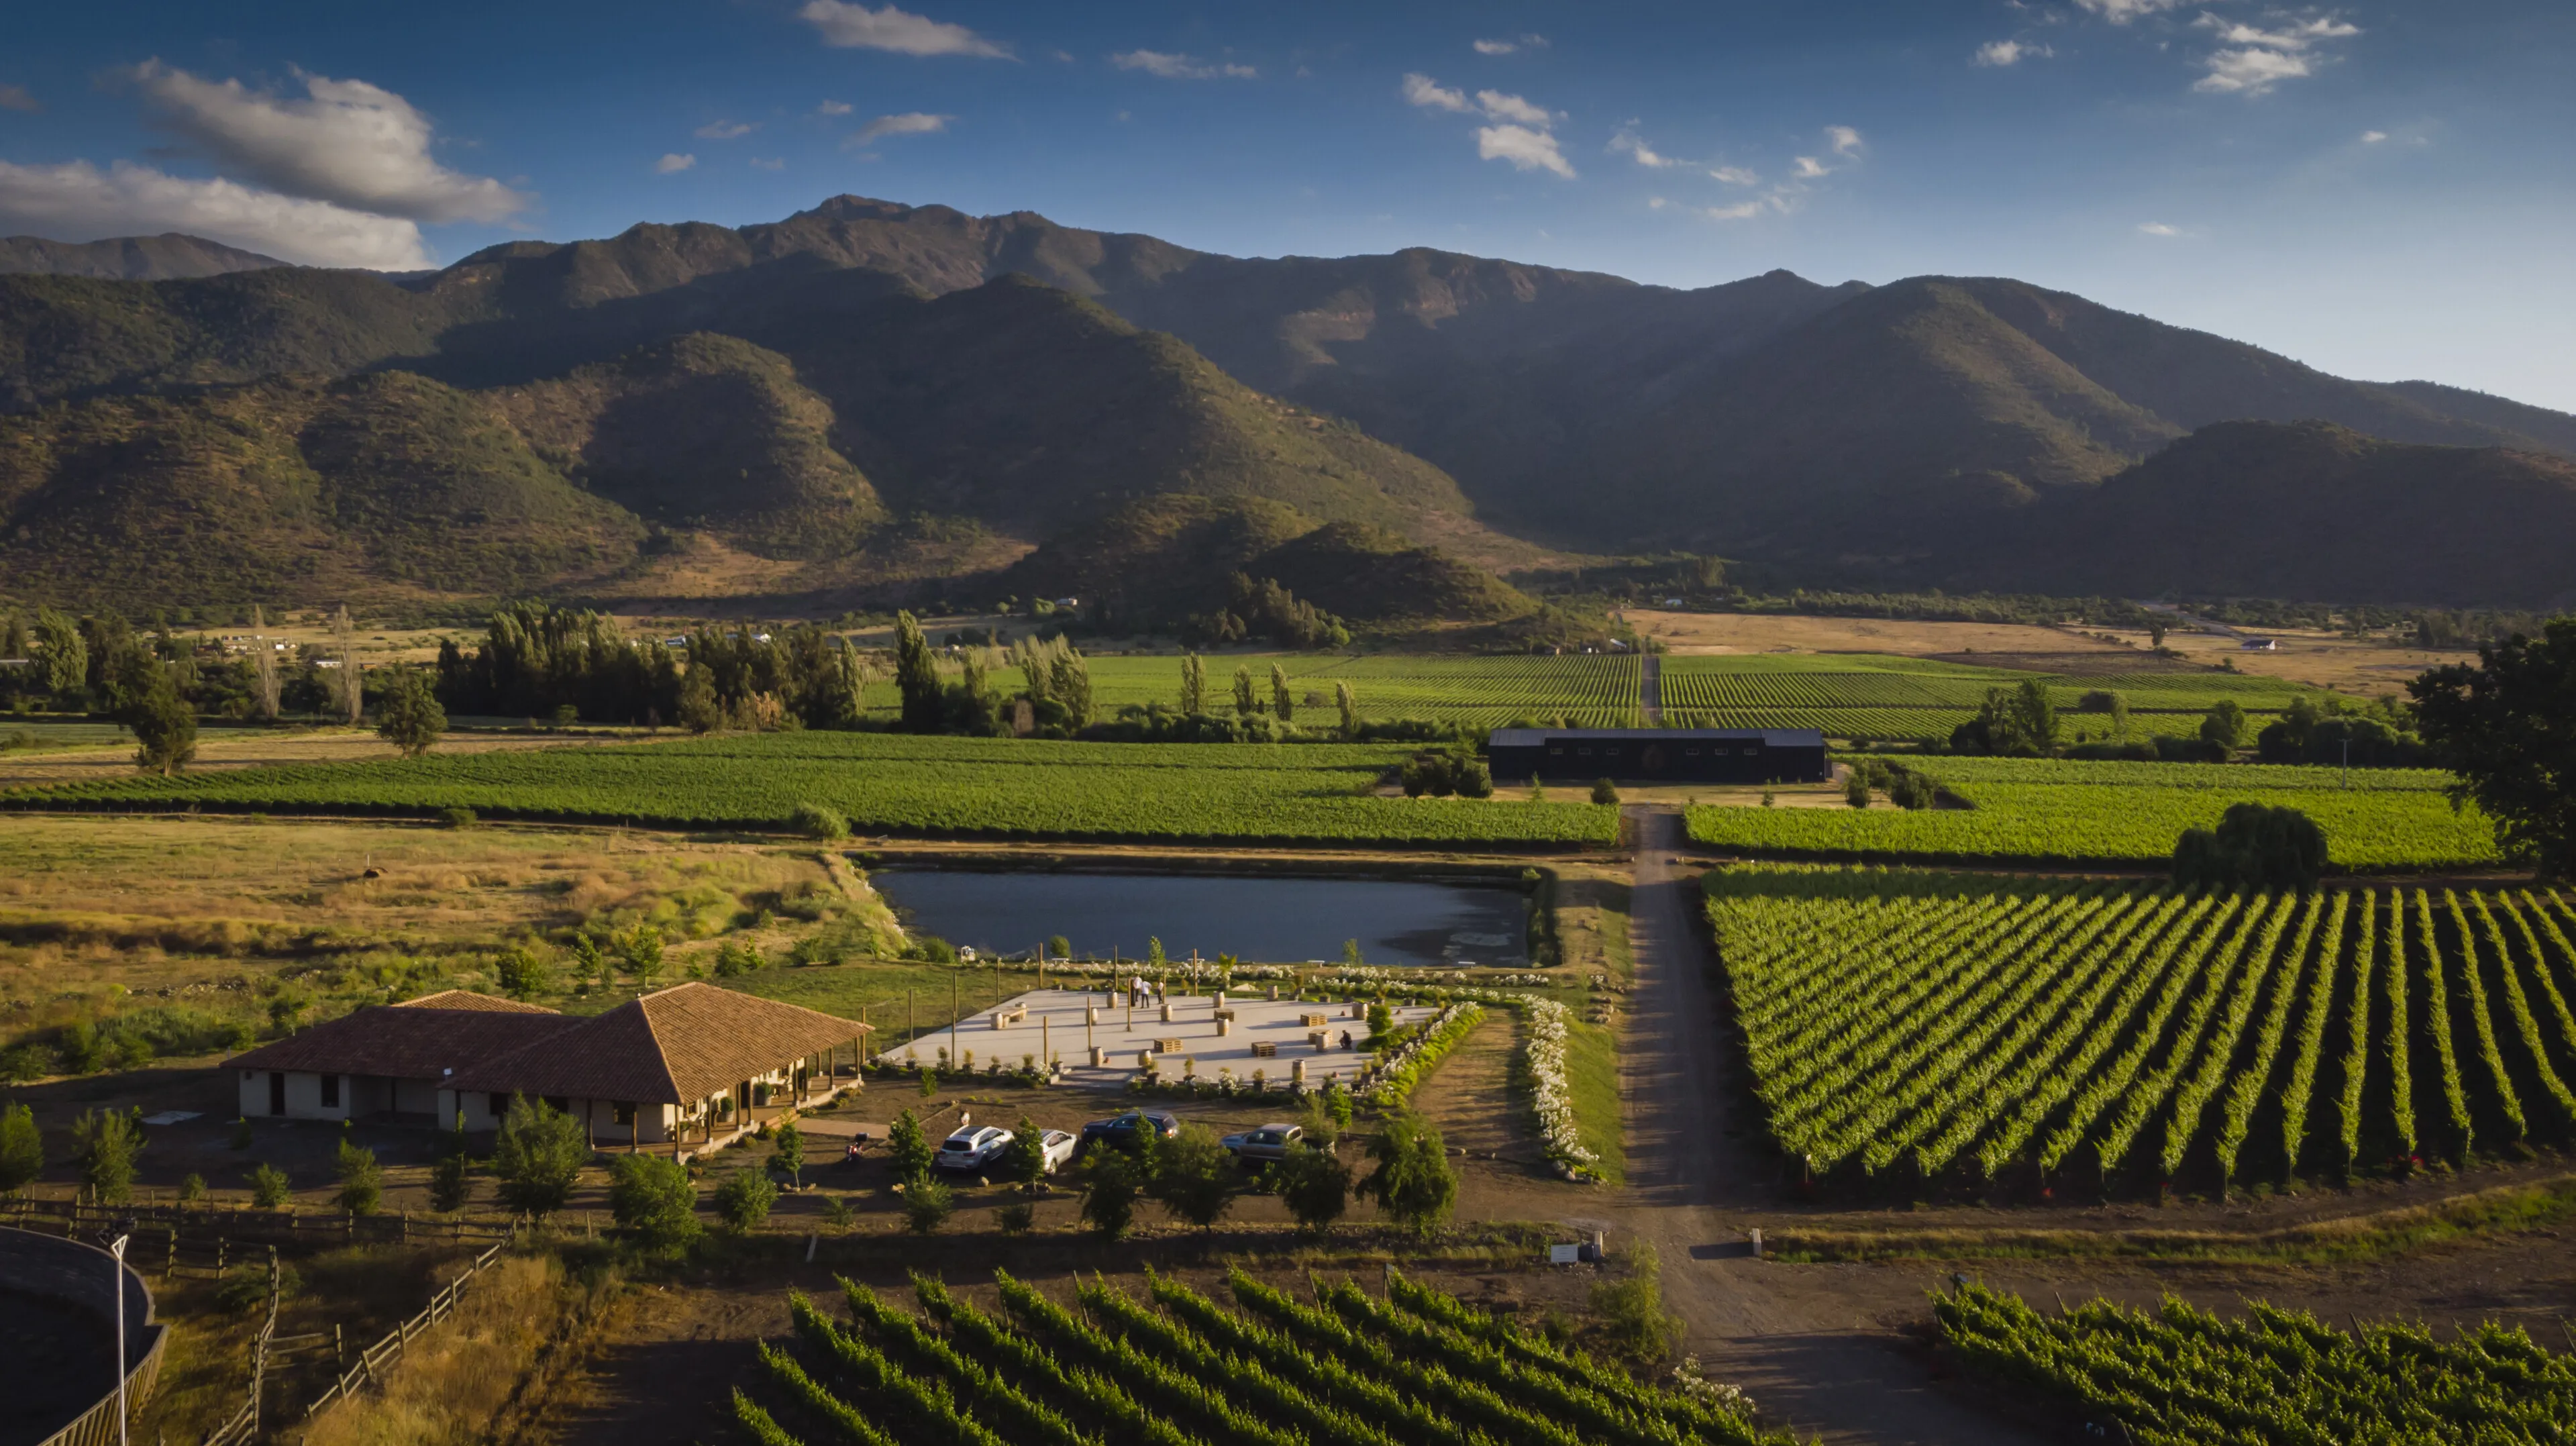 Secret Valley Wineries in Chile, South America | Wineries - Rated 0.9